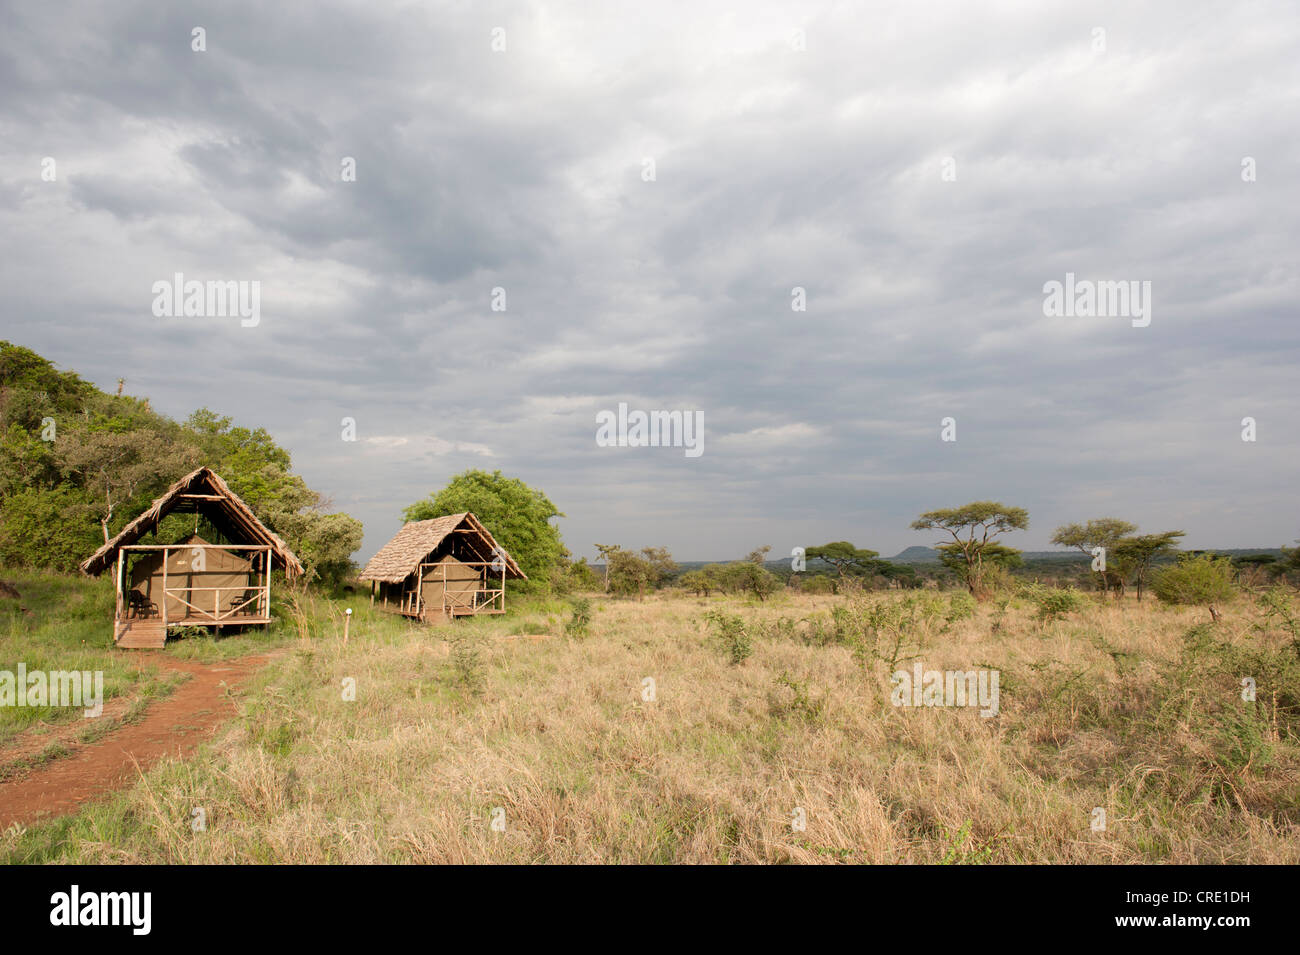 Ikoma Wild Camp, covered tents in the vast savannah, Serengeti National Park, Tanzania, East Africa, Africa Stock Photo